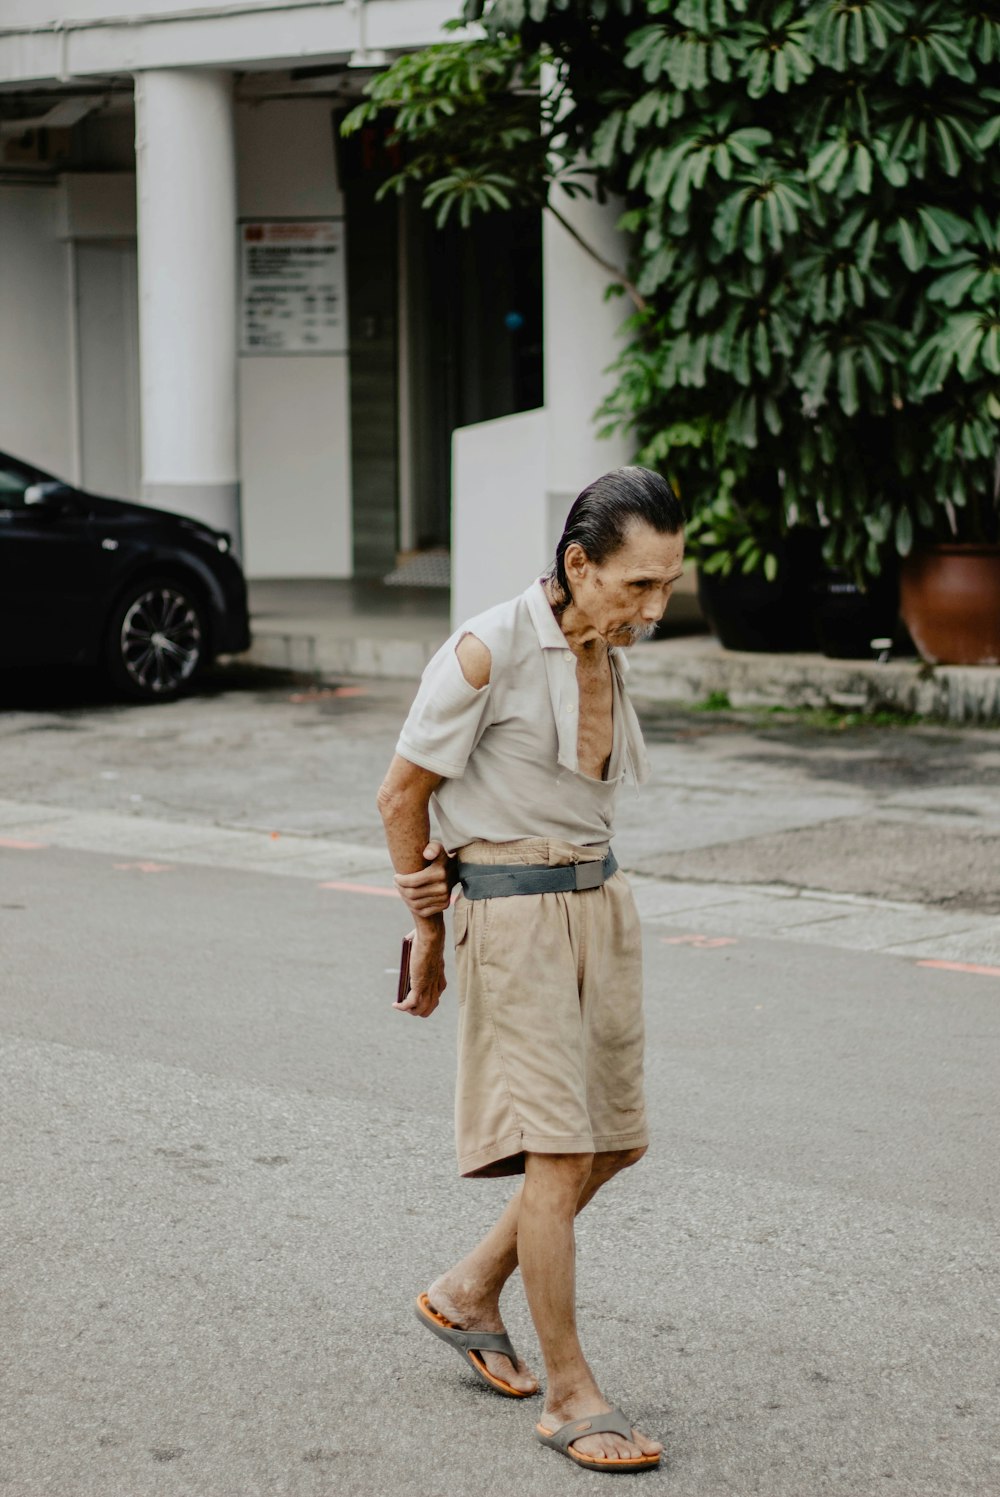 man wearing brown shorts standing on concrete road